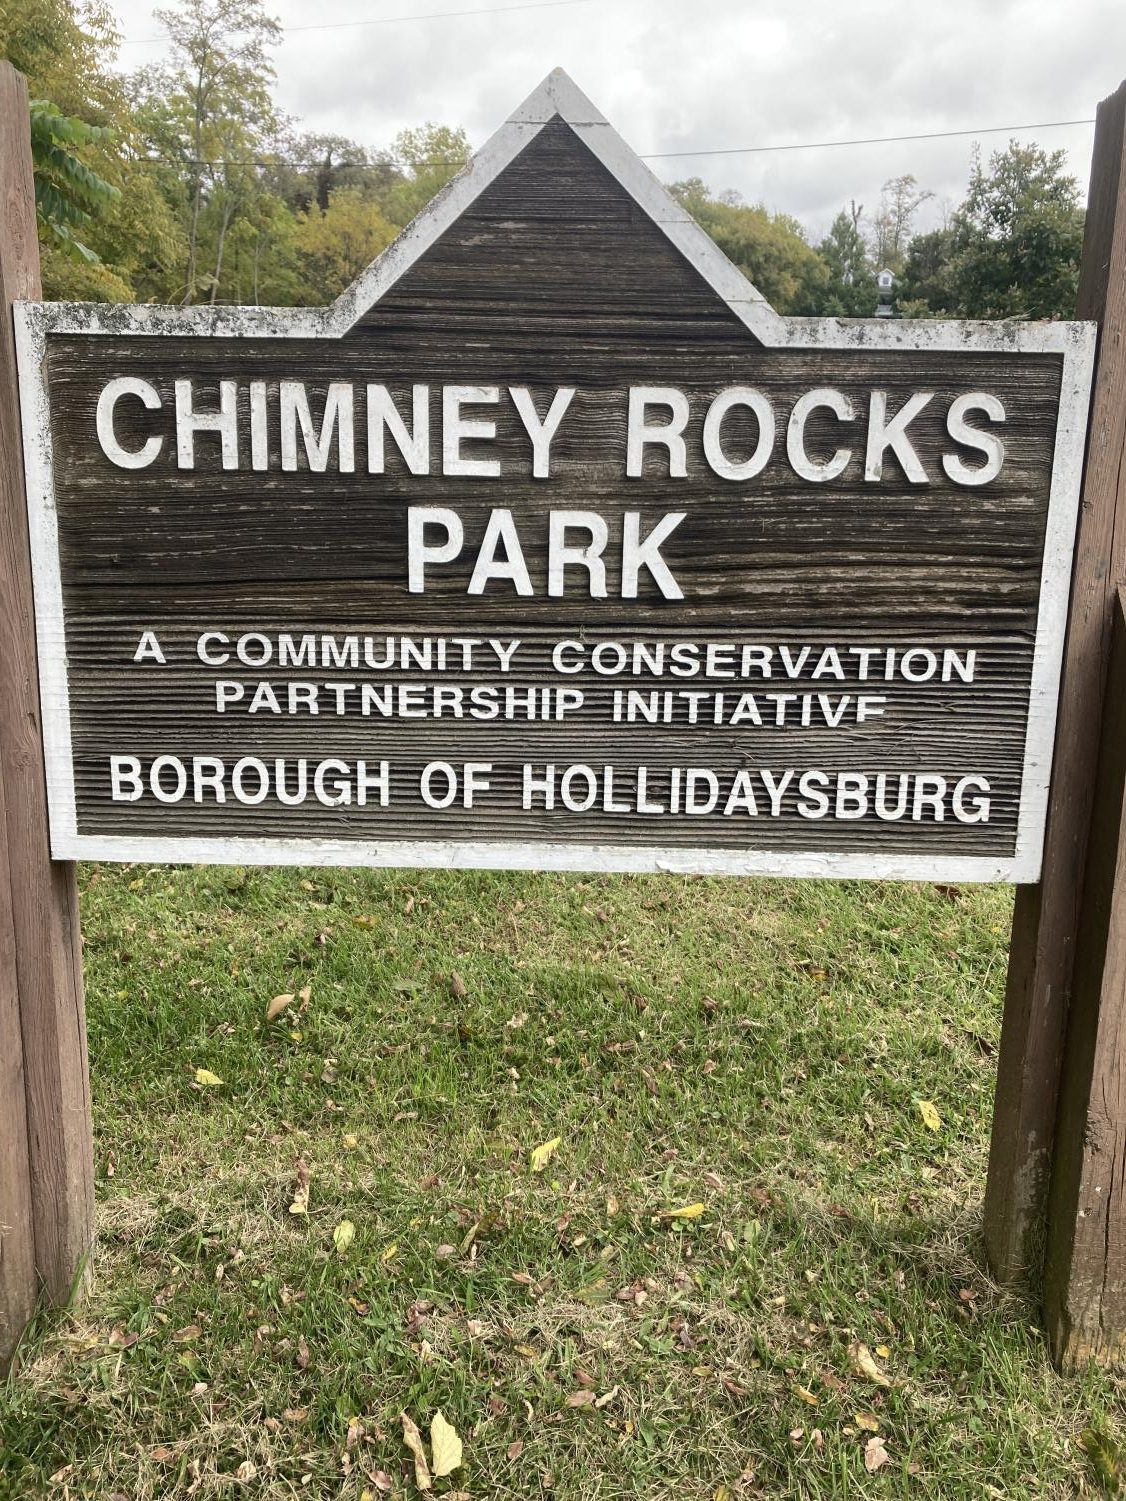 Perfect view. Chimney Rocks is a beautiful park with stunning views and trails. It was bought by the Borough of Hollidaysburg and many activities such as concerts took place at it.